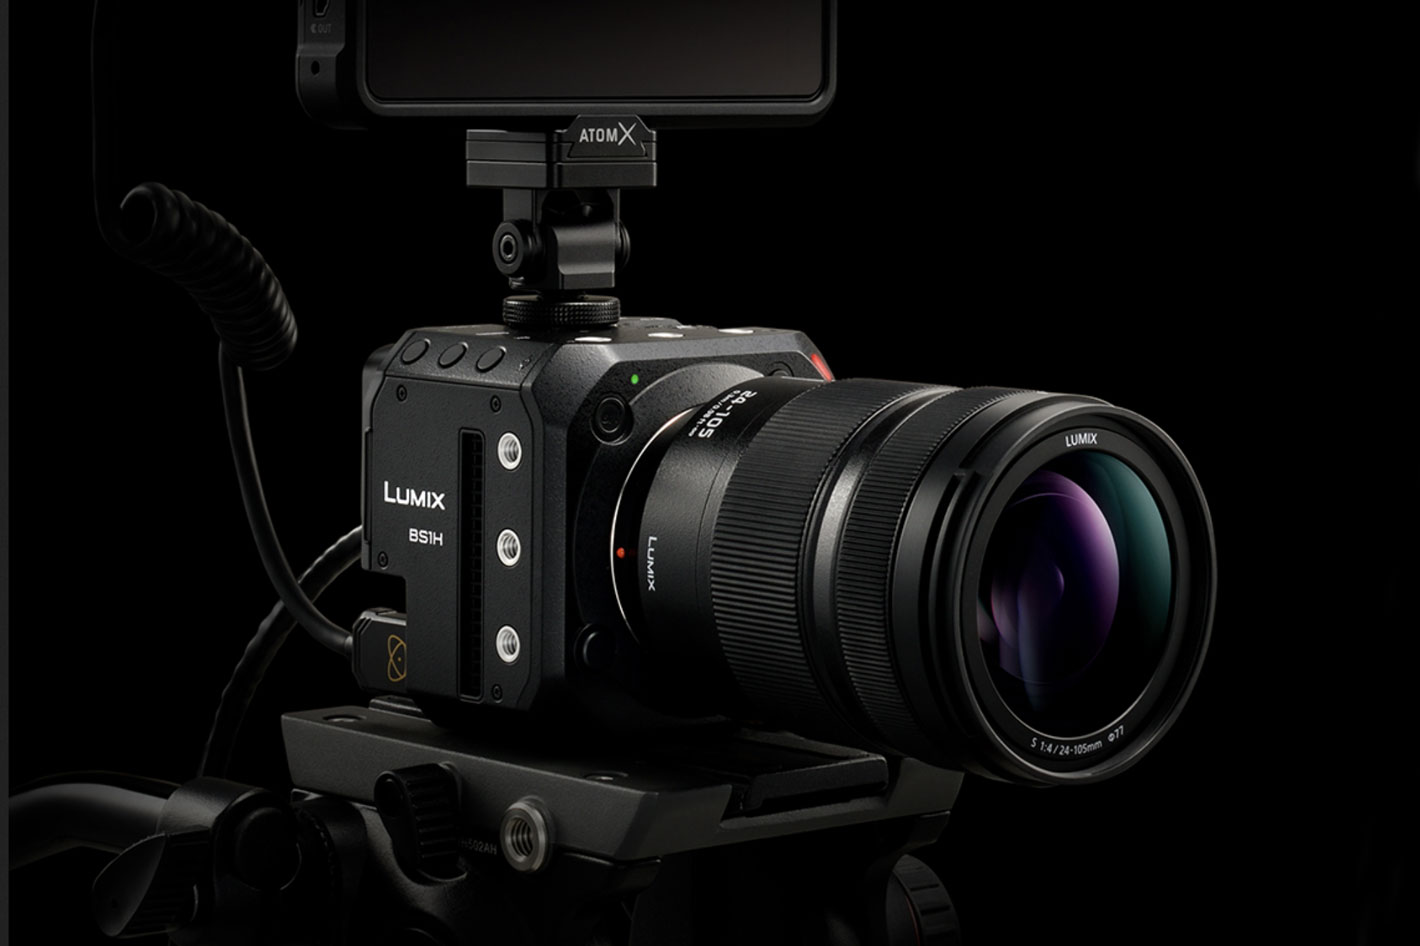 Panasonic LUMIX BS1H: a new cinema camera in a compact body